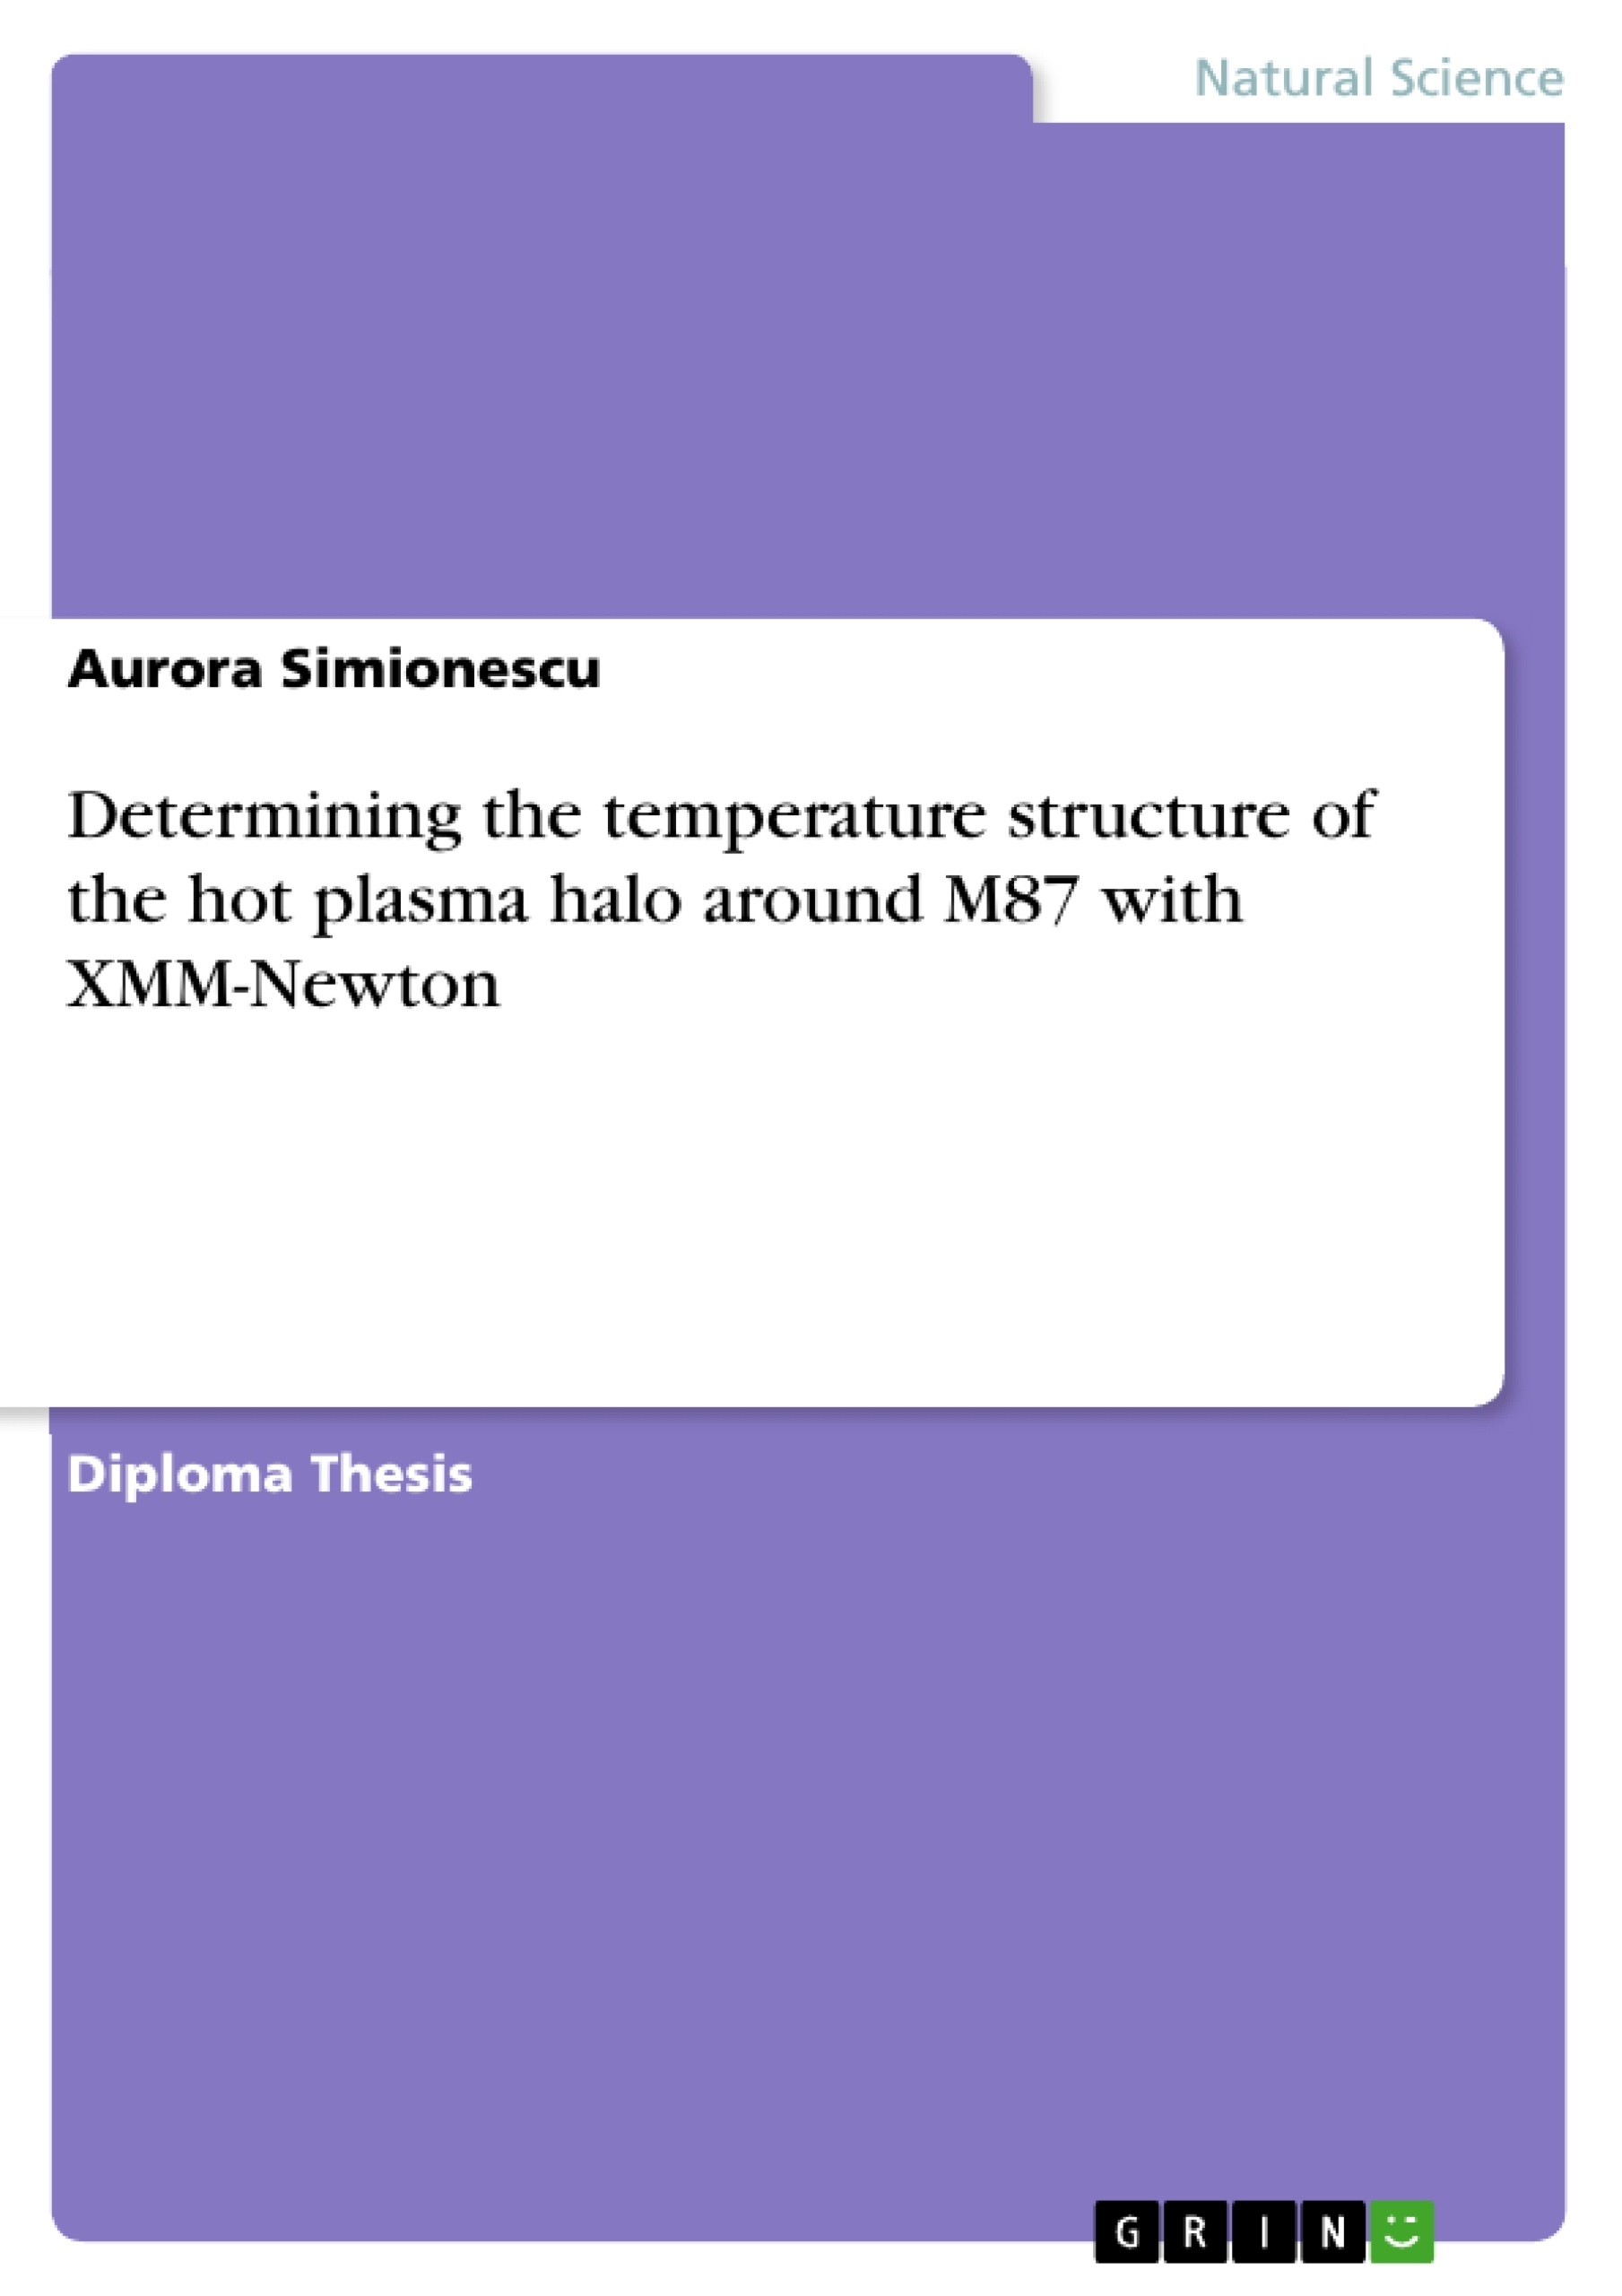 Título: Determining the temperature structure of the hot plasma halo around M87 with XMM-Newton